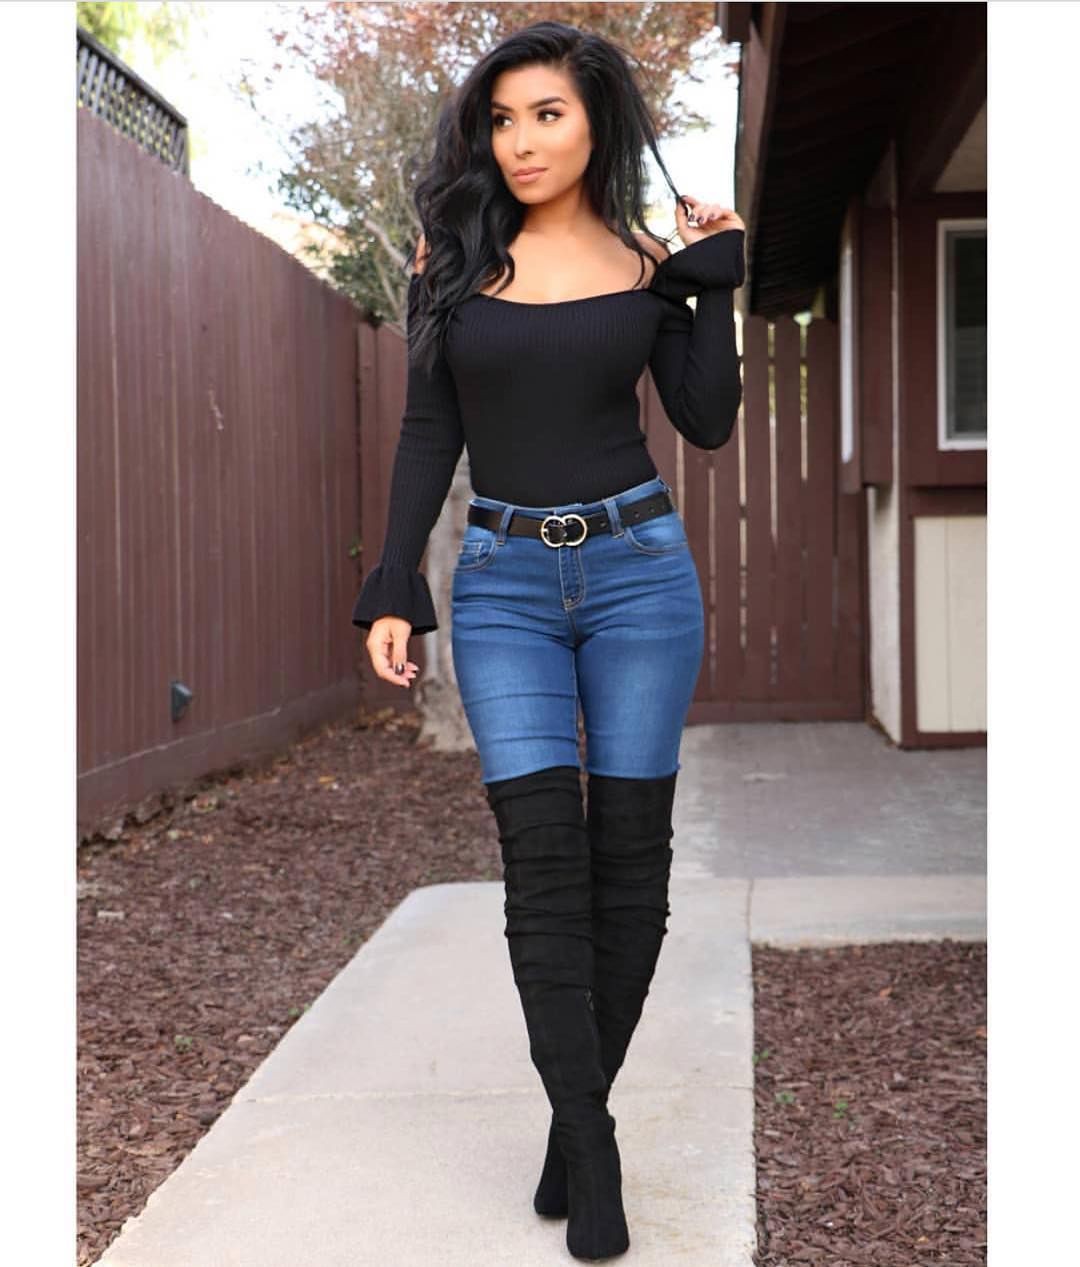 thigh high boots and jeans outfit